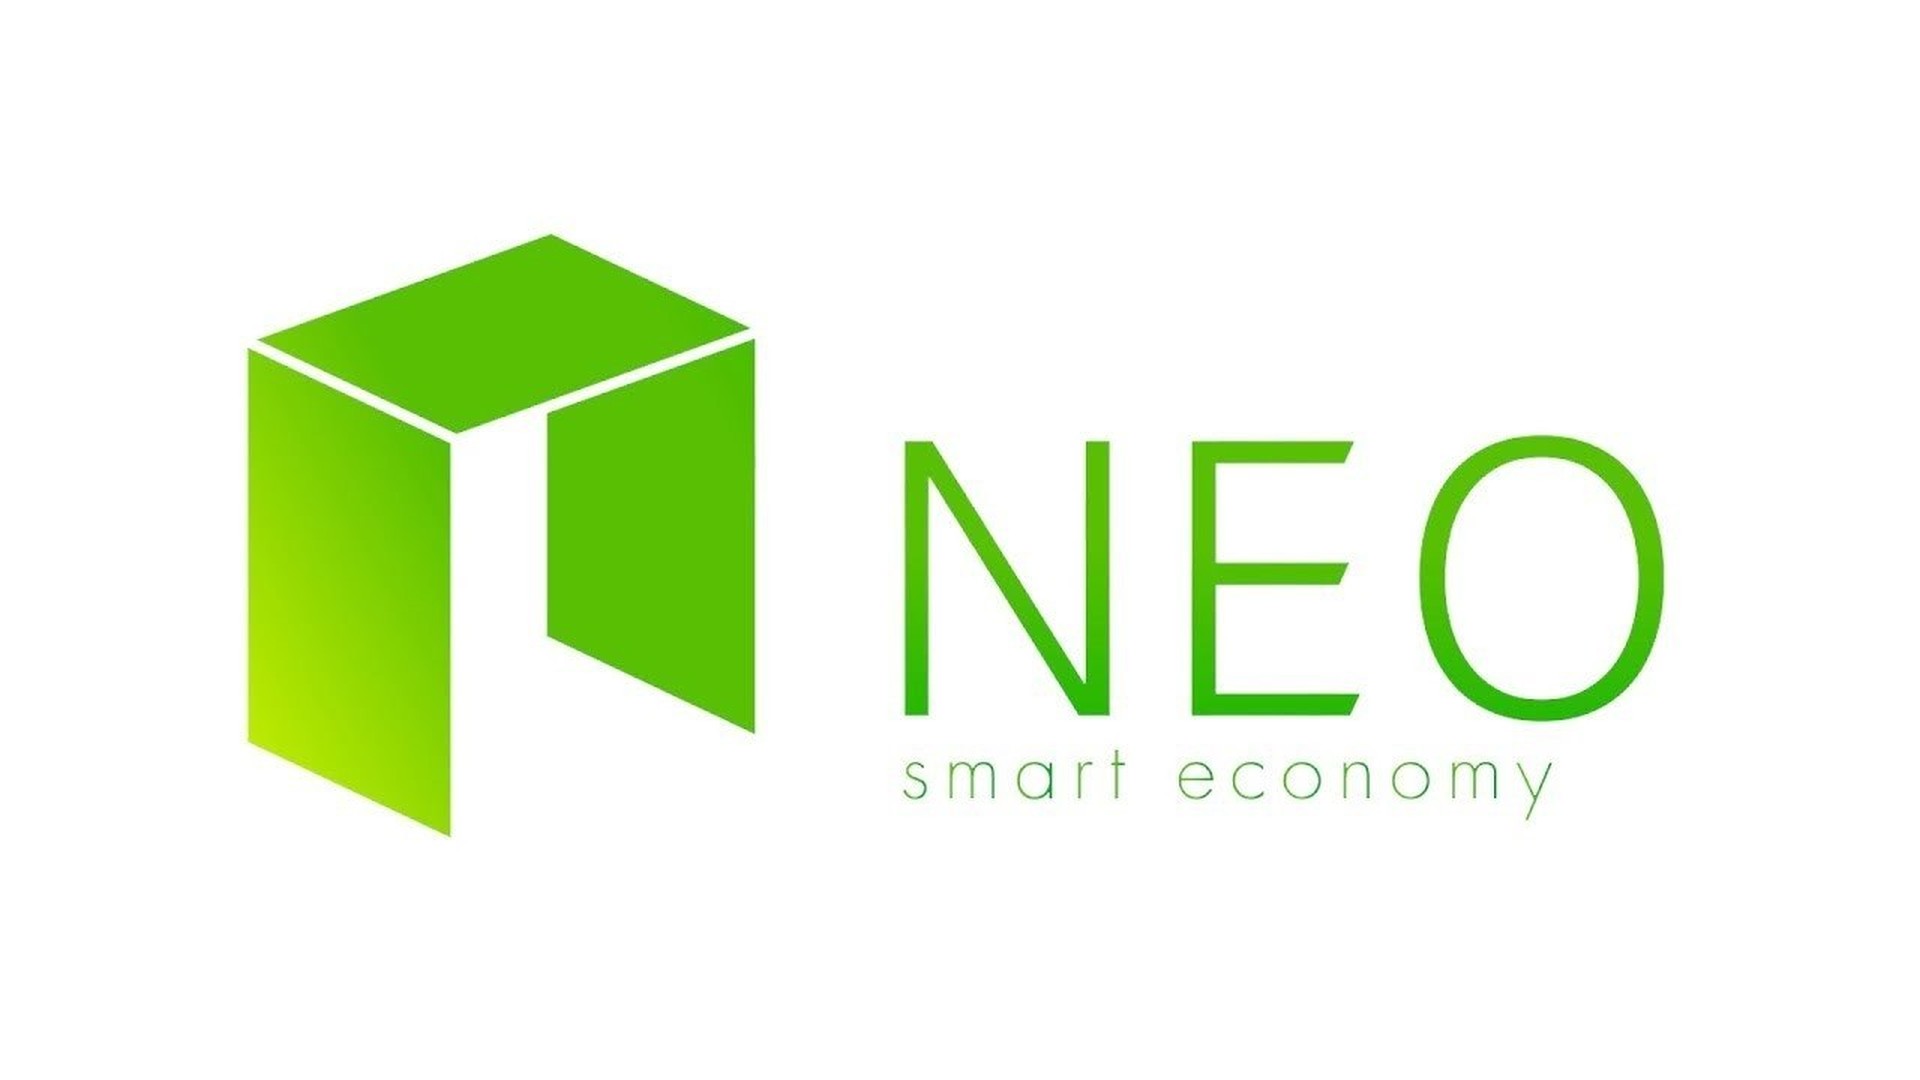 NEO VS Ethereum: Could NEO Be the Next Big Thing After Ethereum?